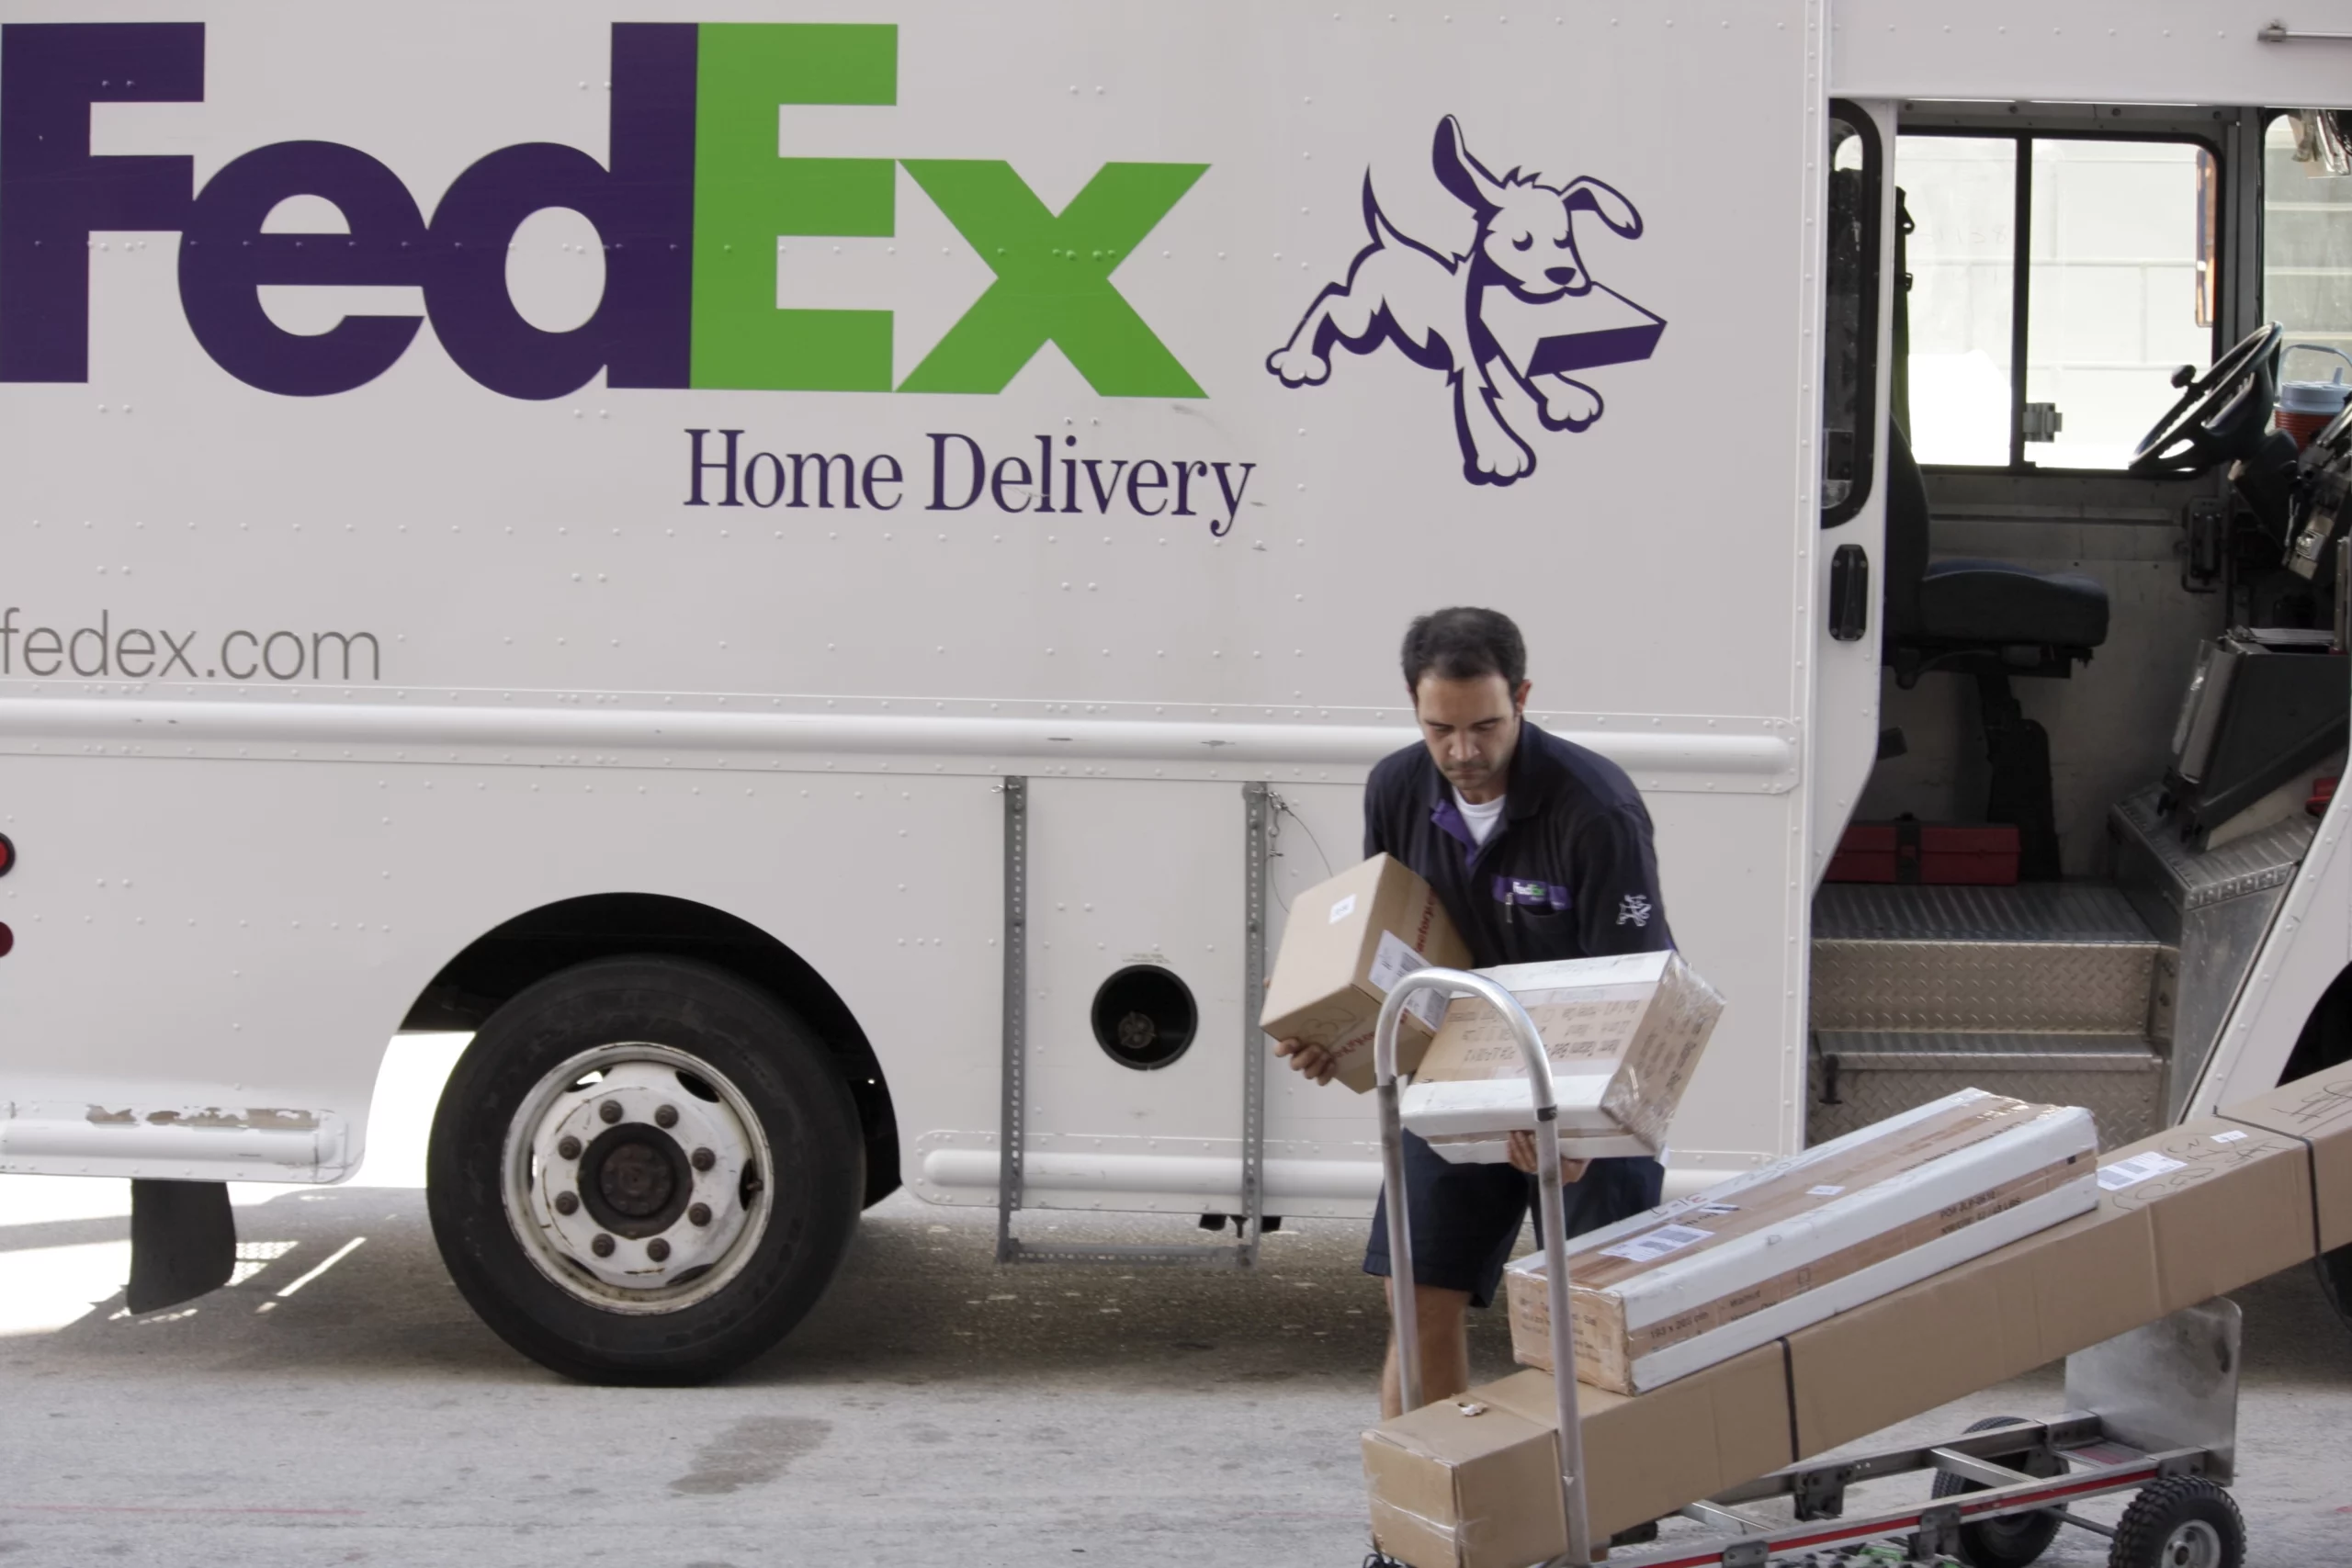 What Time Does FedEx Stop Delivering?